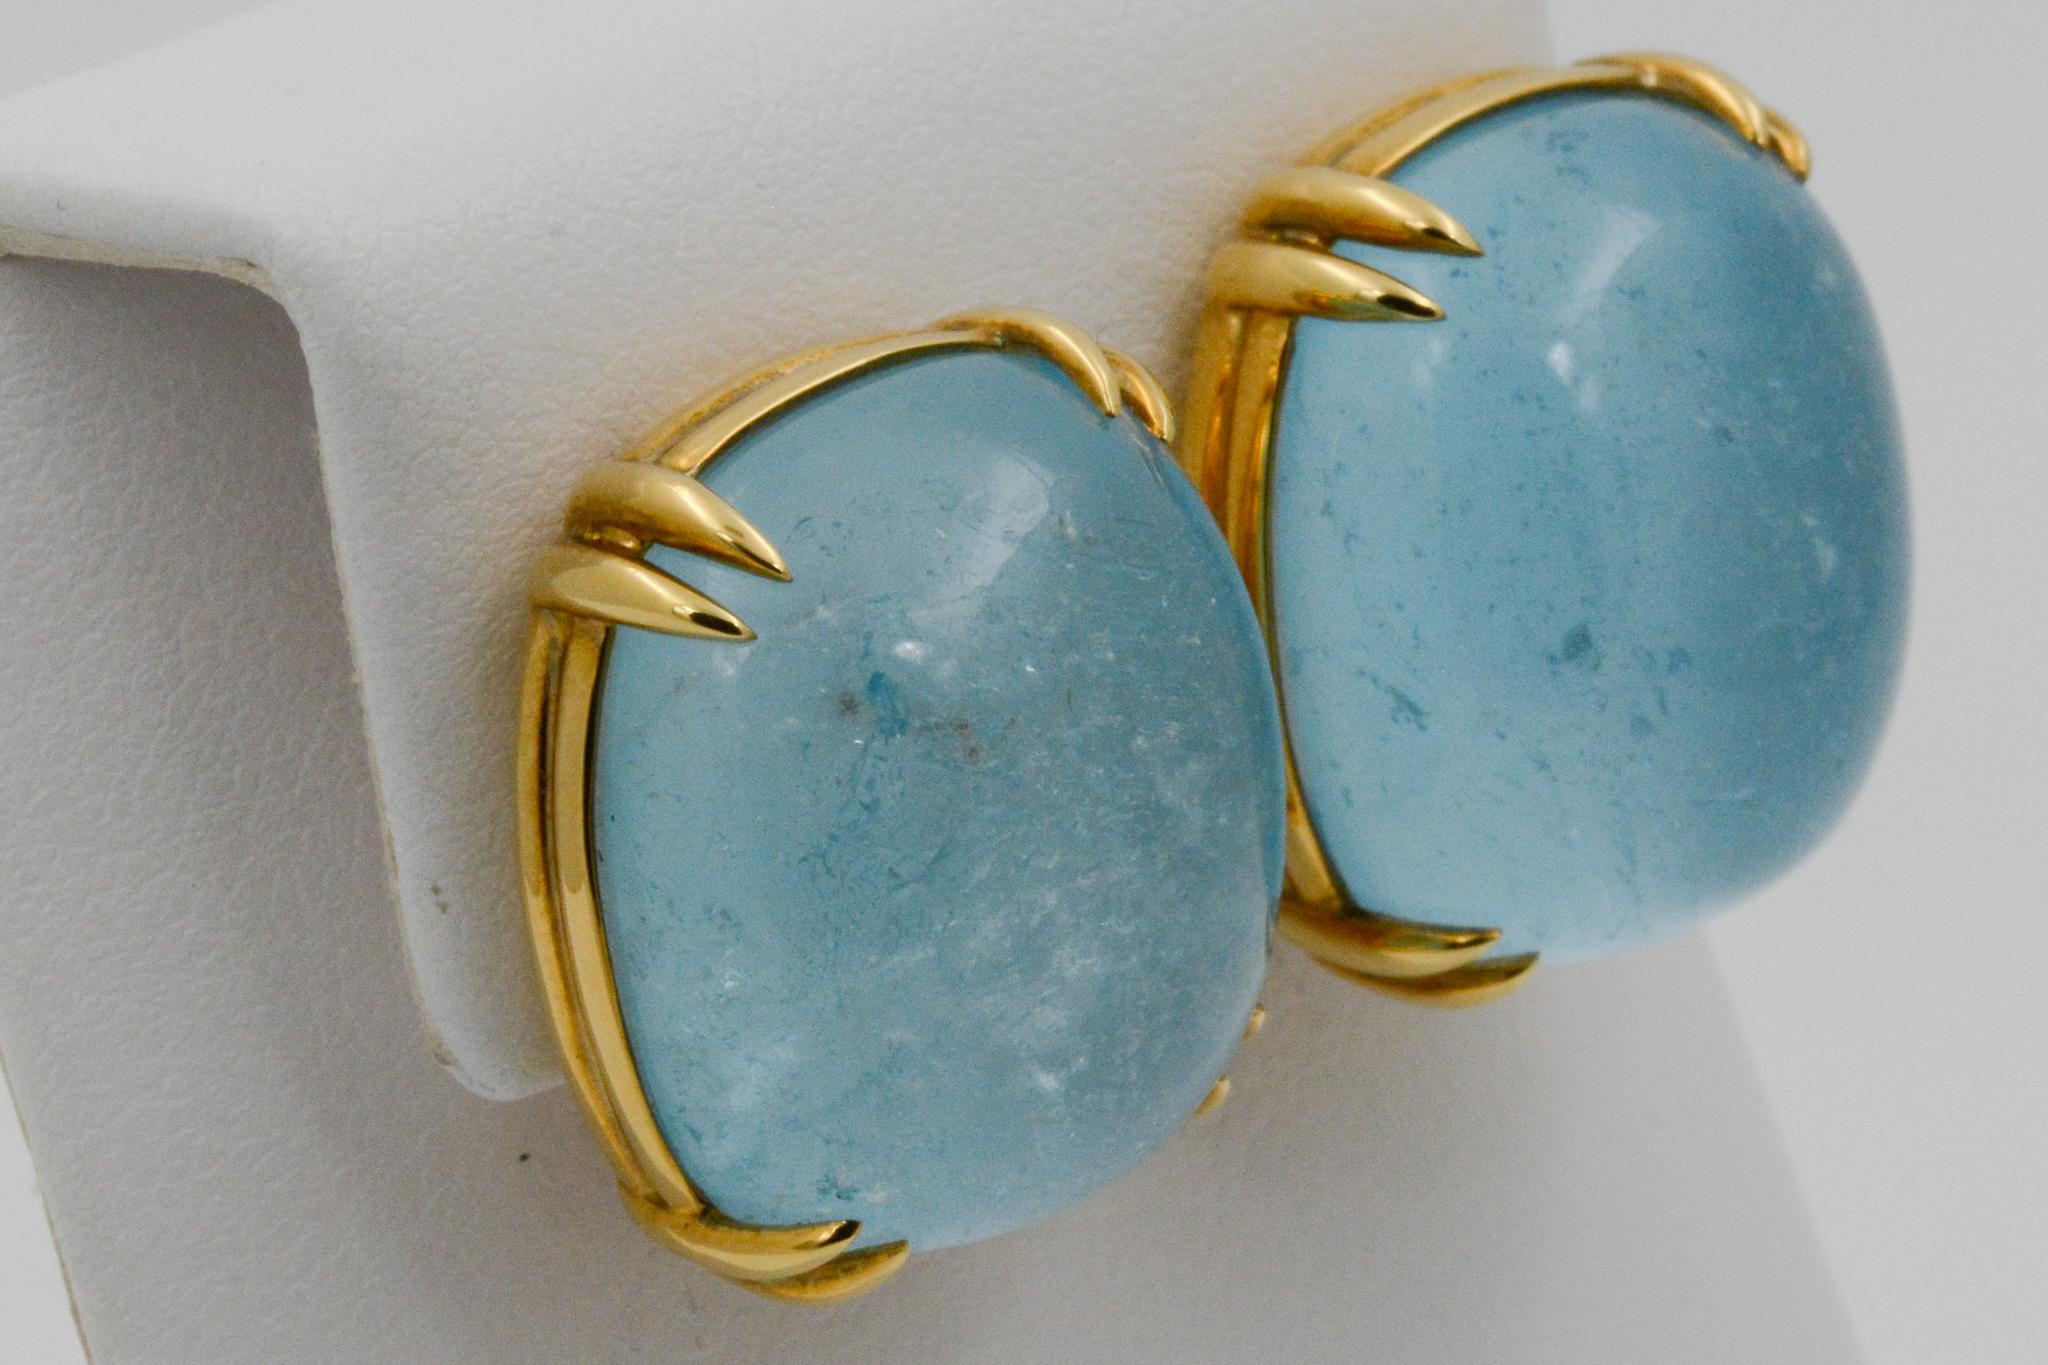 From Seaman Schepps, these Capri 18k yellow gold earrings feature blue topaz and are signed Seaman Schepps. 